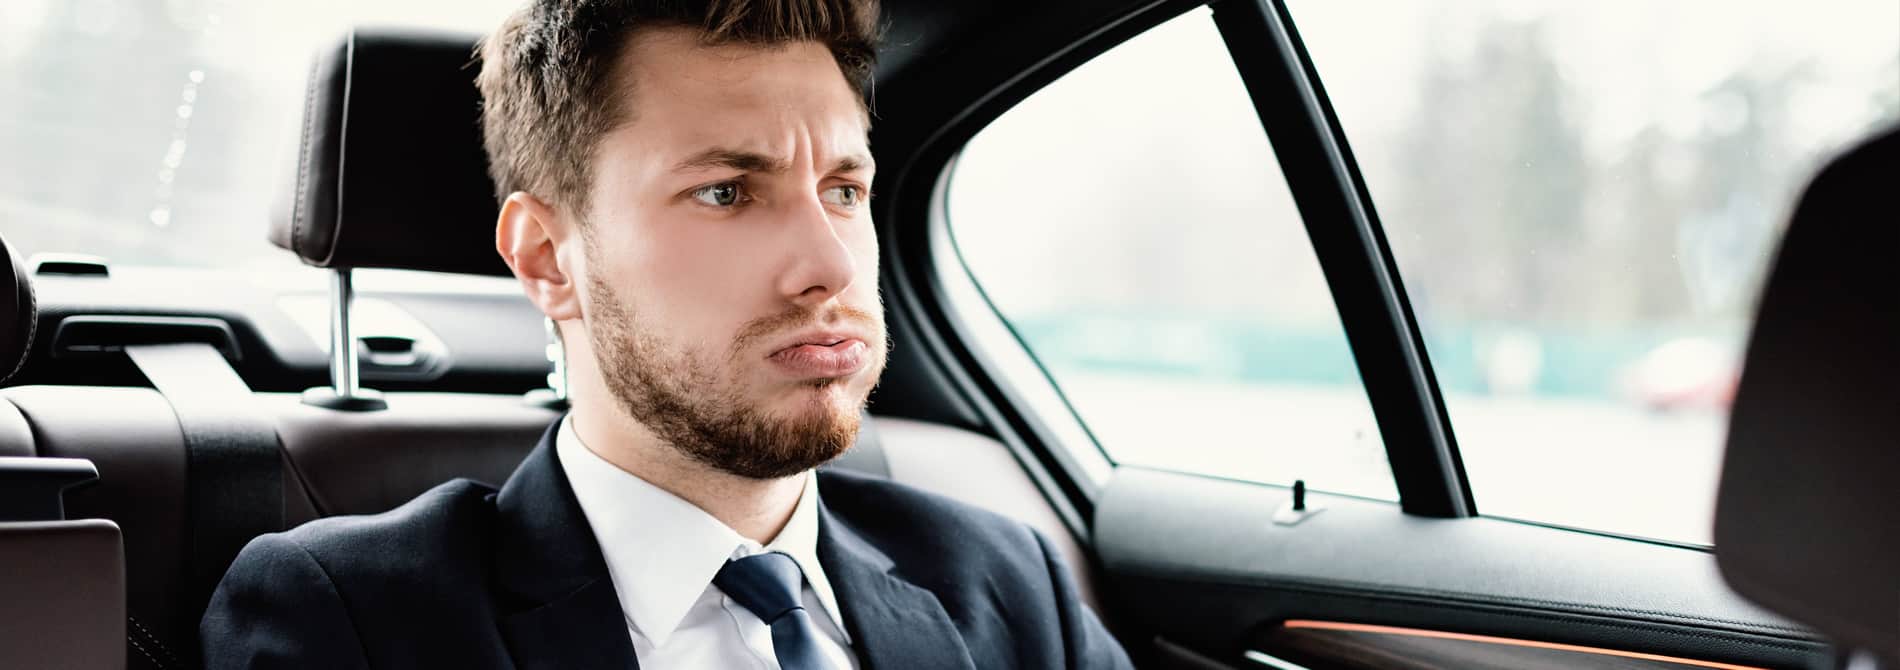 Young wealthy man stressed out in back of car.